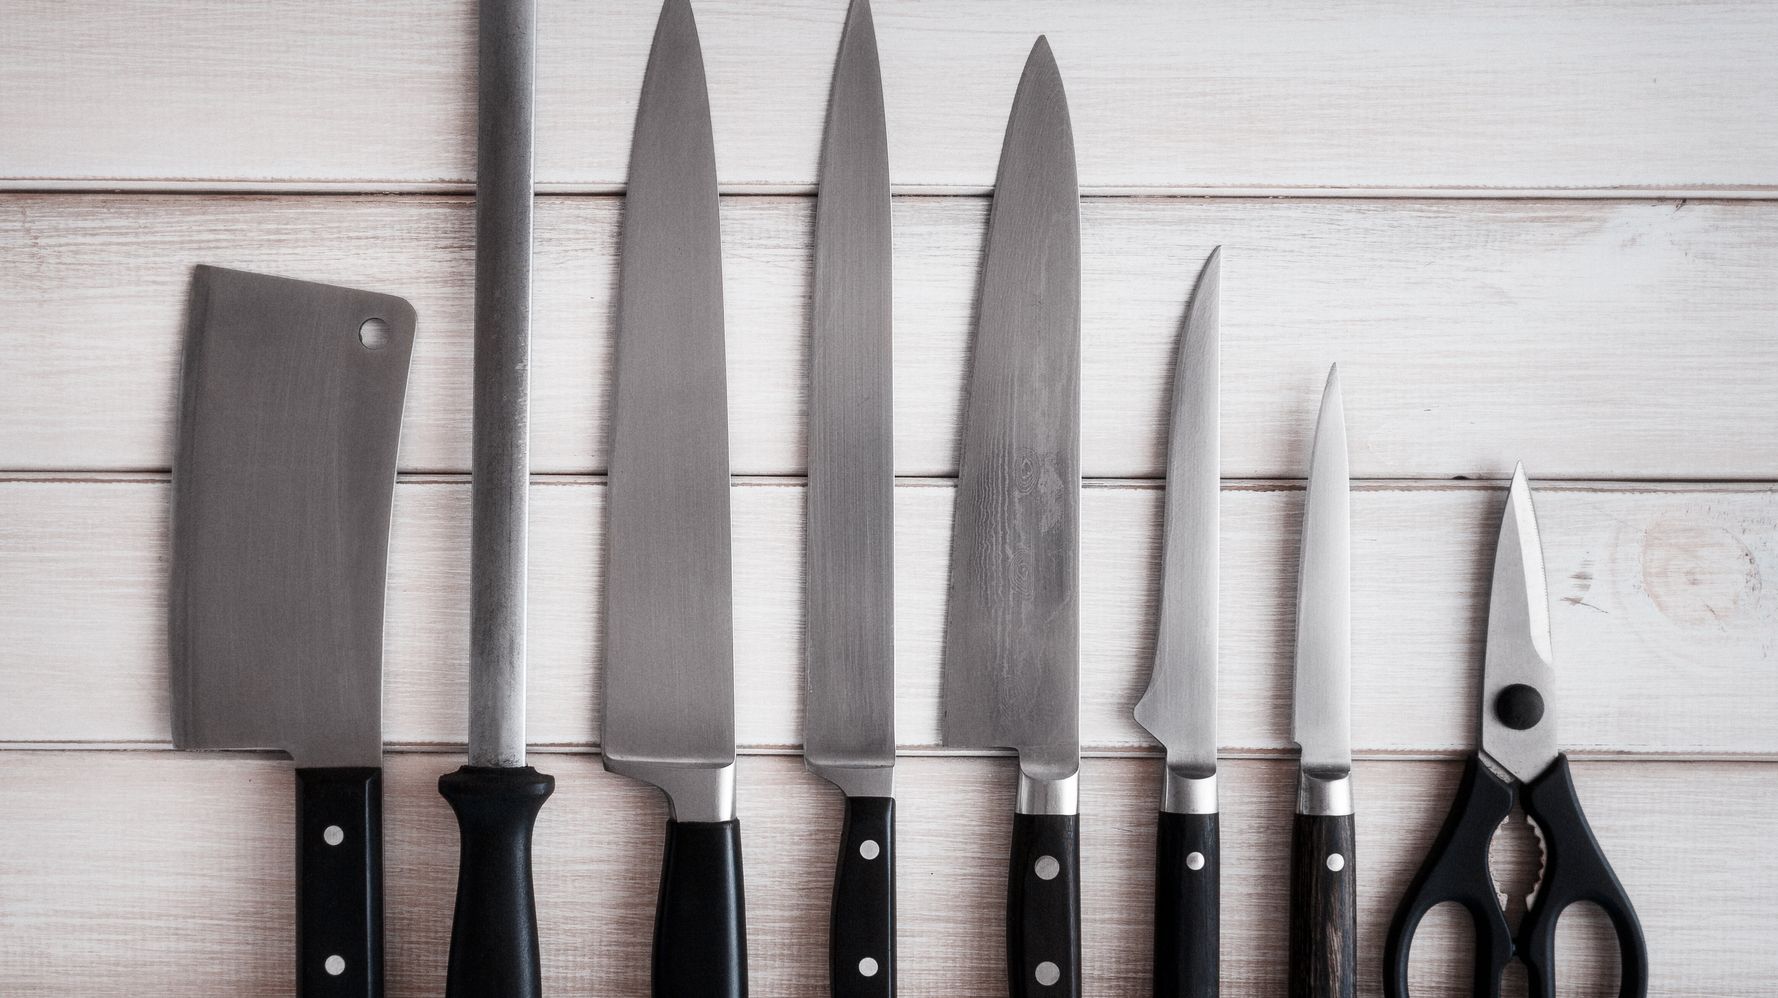 These Laser-Sharp Japanese Knives Are a Kitchen Staple